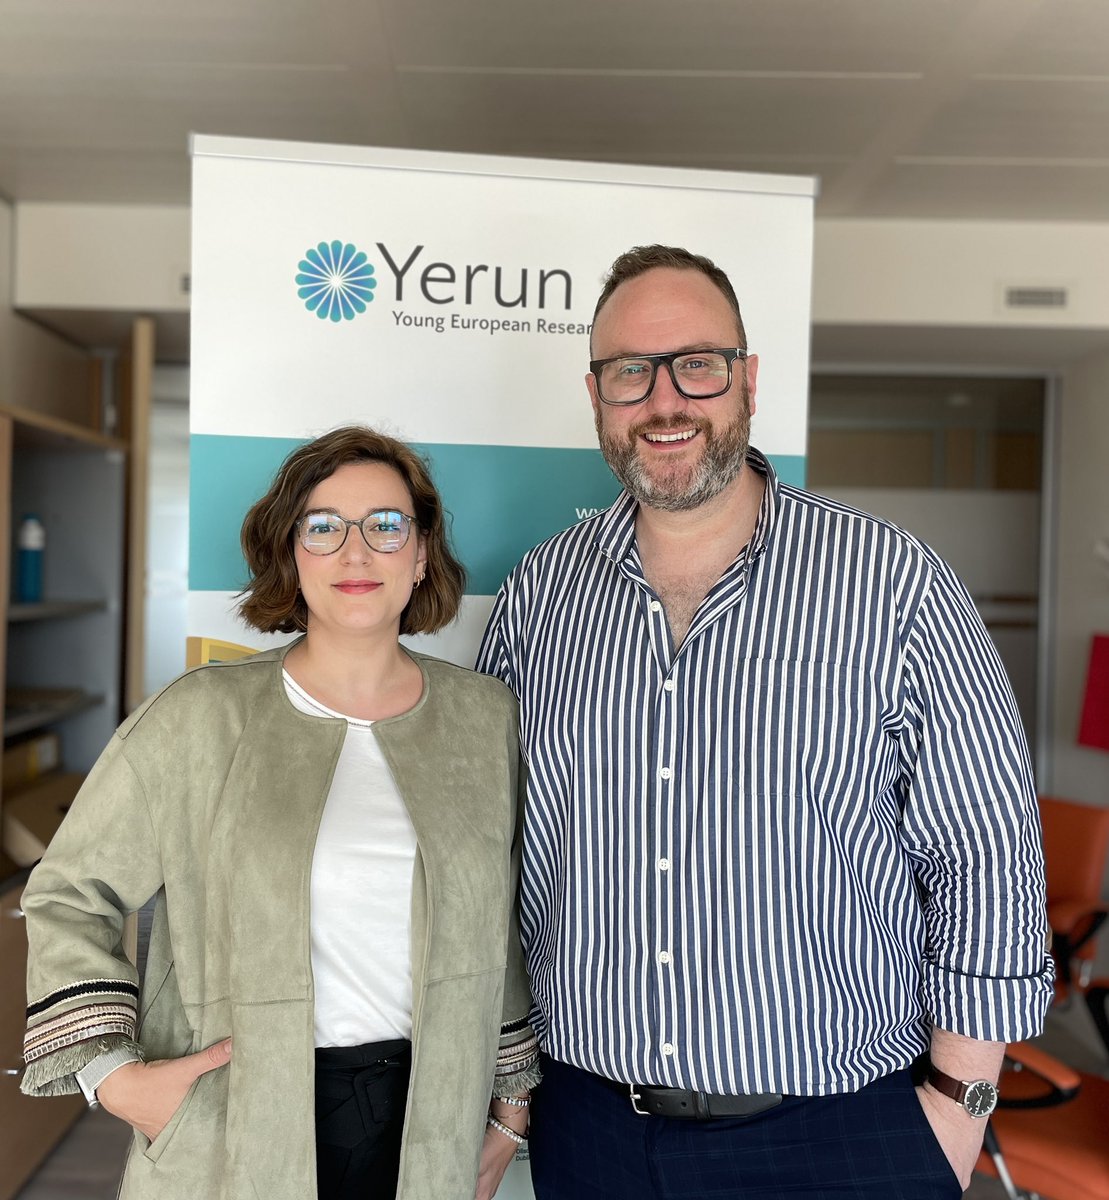 Fantastic catch up morning with my fellow @LukeSheehyATN on our Australian-European collaborations. Impressive work on the #skillsagenda and the #futureofwork #LLL and #knowledgevalorisation. We got a lot to take forward now Luke ;) @YERUN_EU